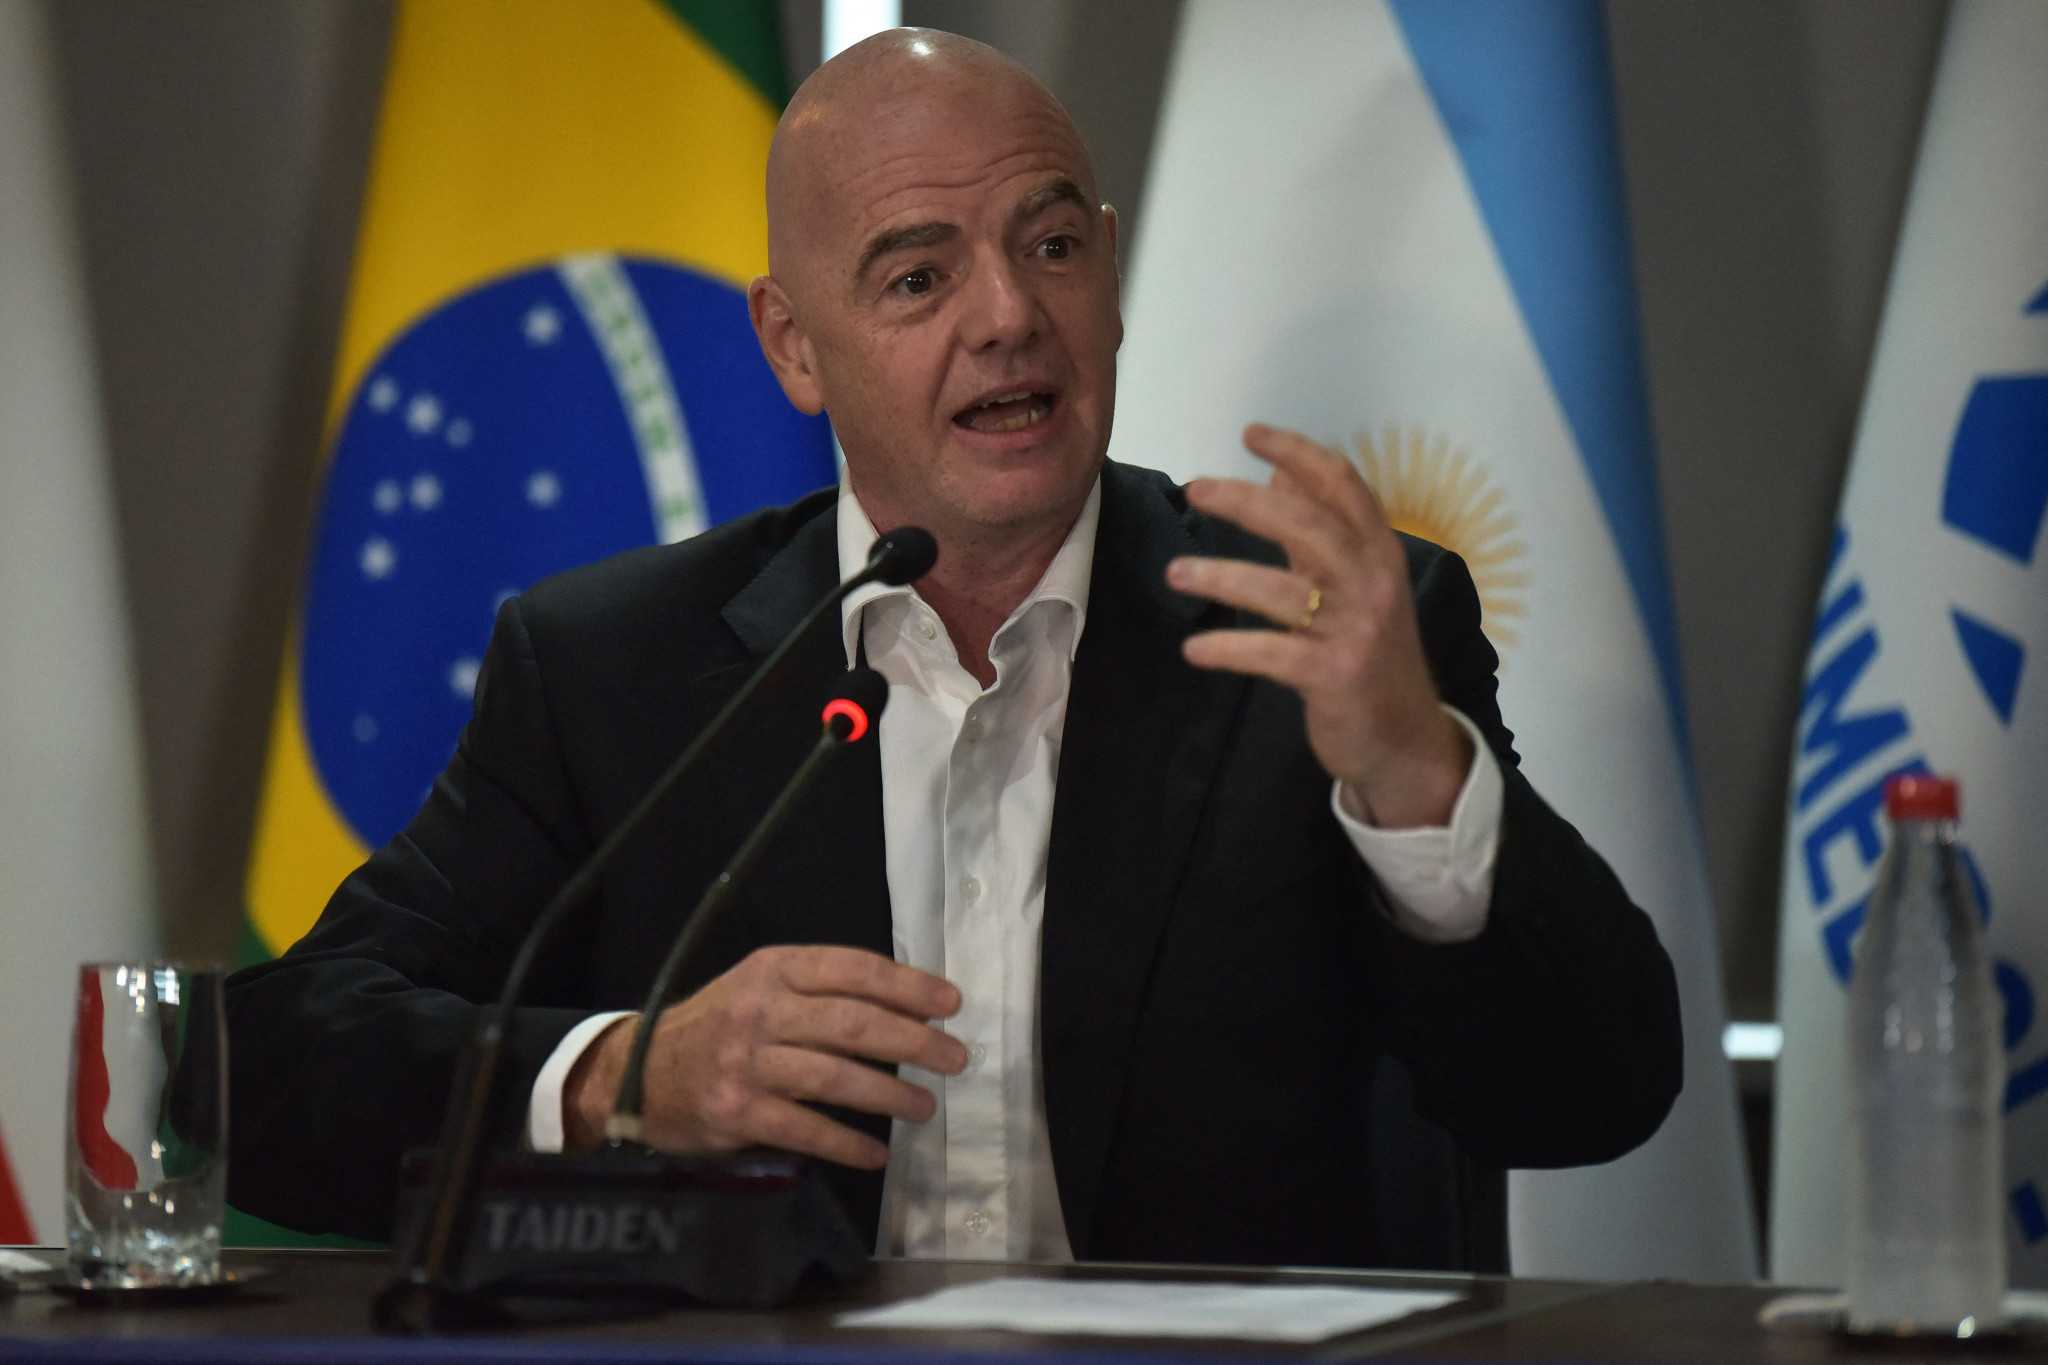 Gianni Infantino said that FIFA will make the decision on whether to award Argentina the tournament in the next few days ©Getty Images